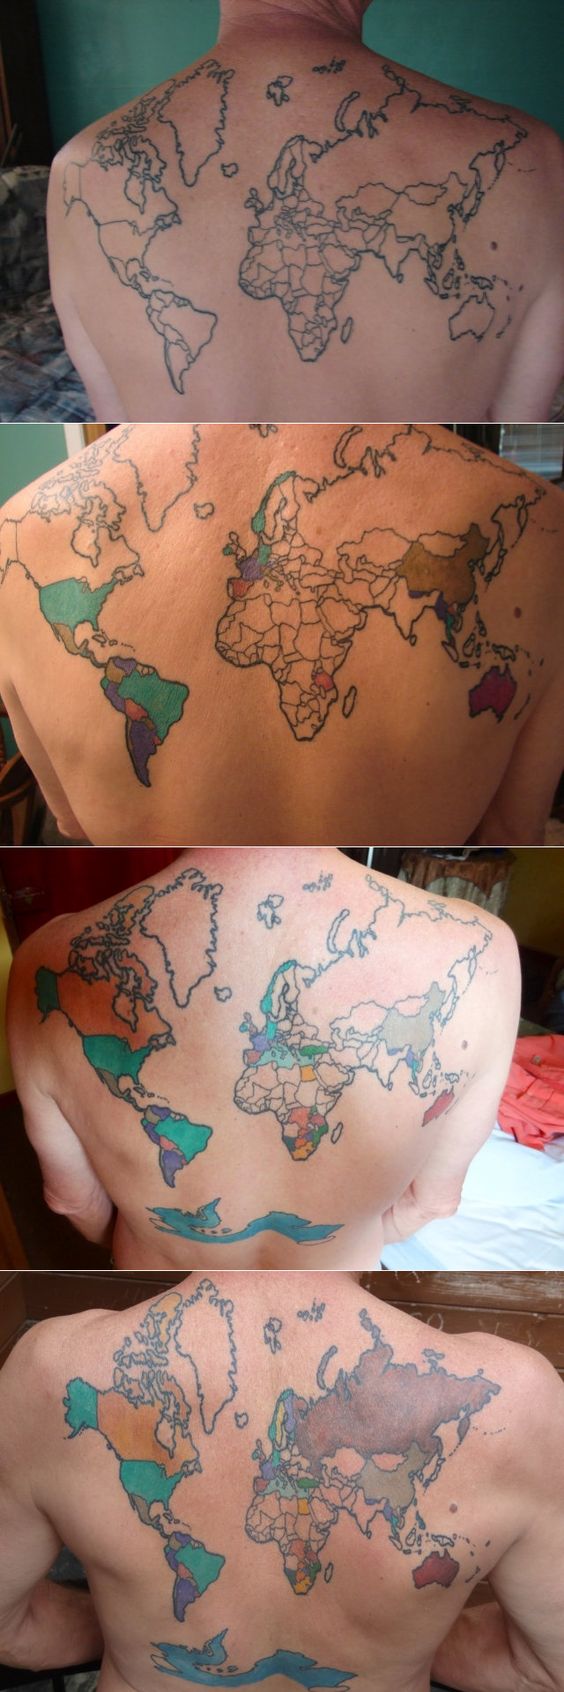 World Map with Countries Tattoo